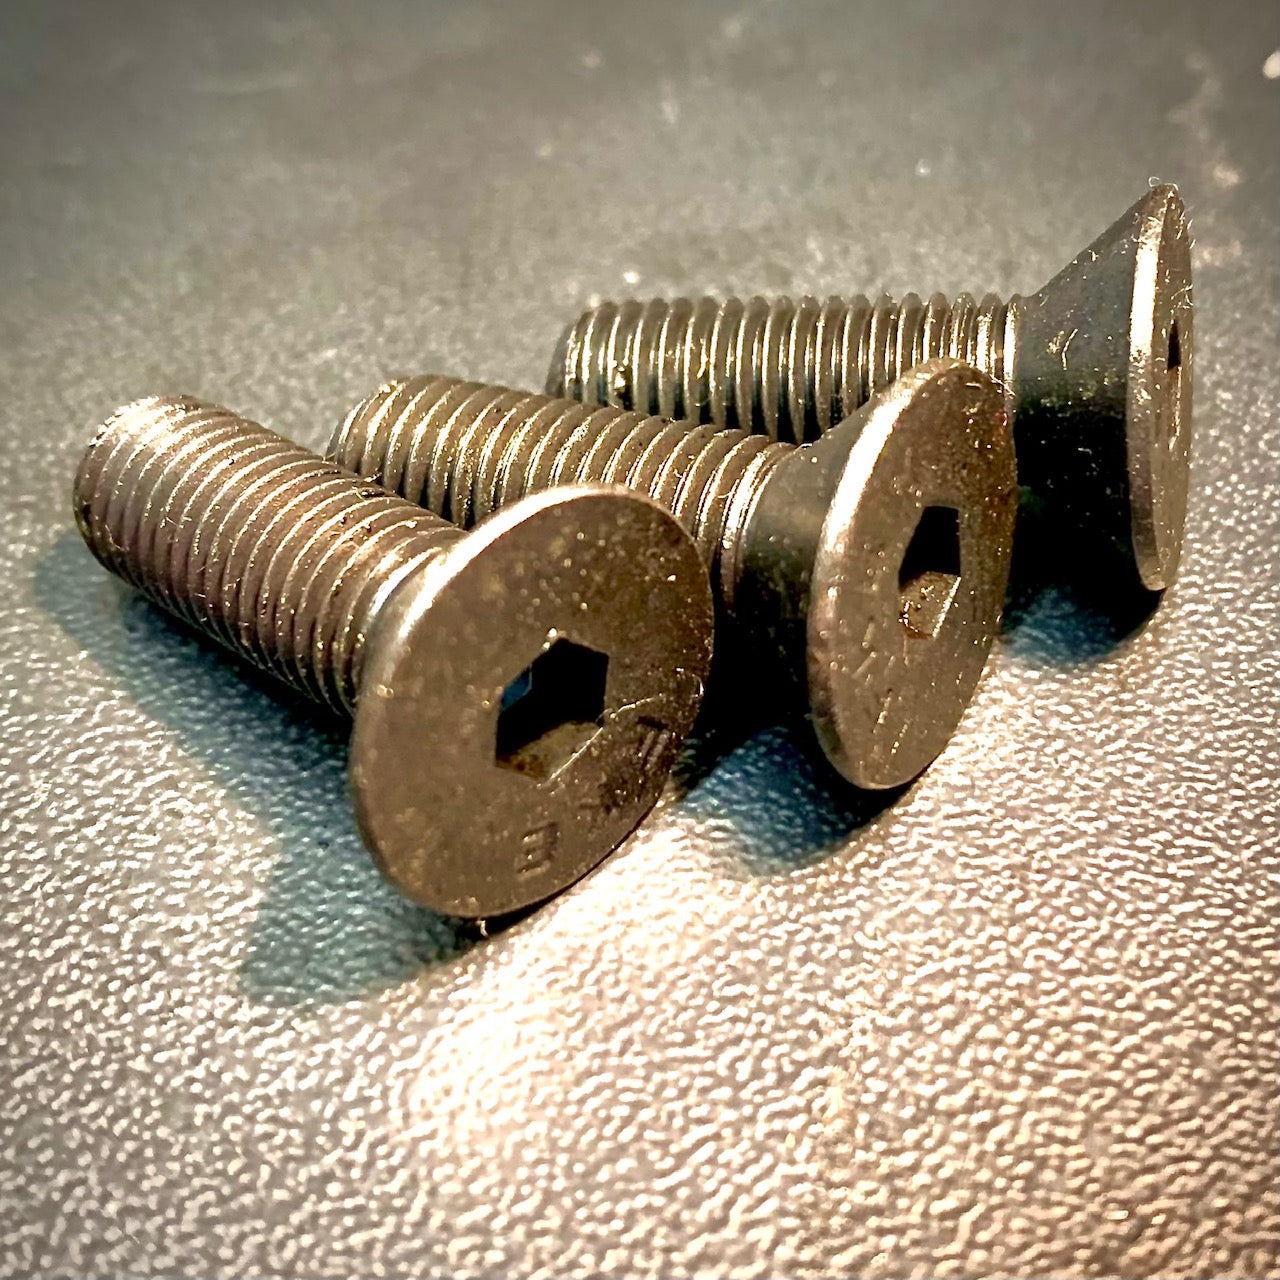 UNF 3/4" x 3" Socket Screw Countersunk High Tensile 10.9 DIN7991 - Fixaball Ltd. Fixings and Fasteners UK